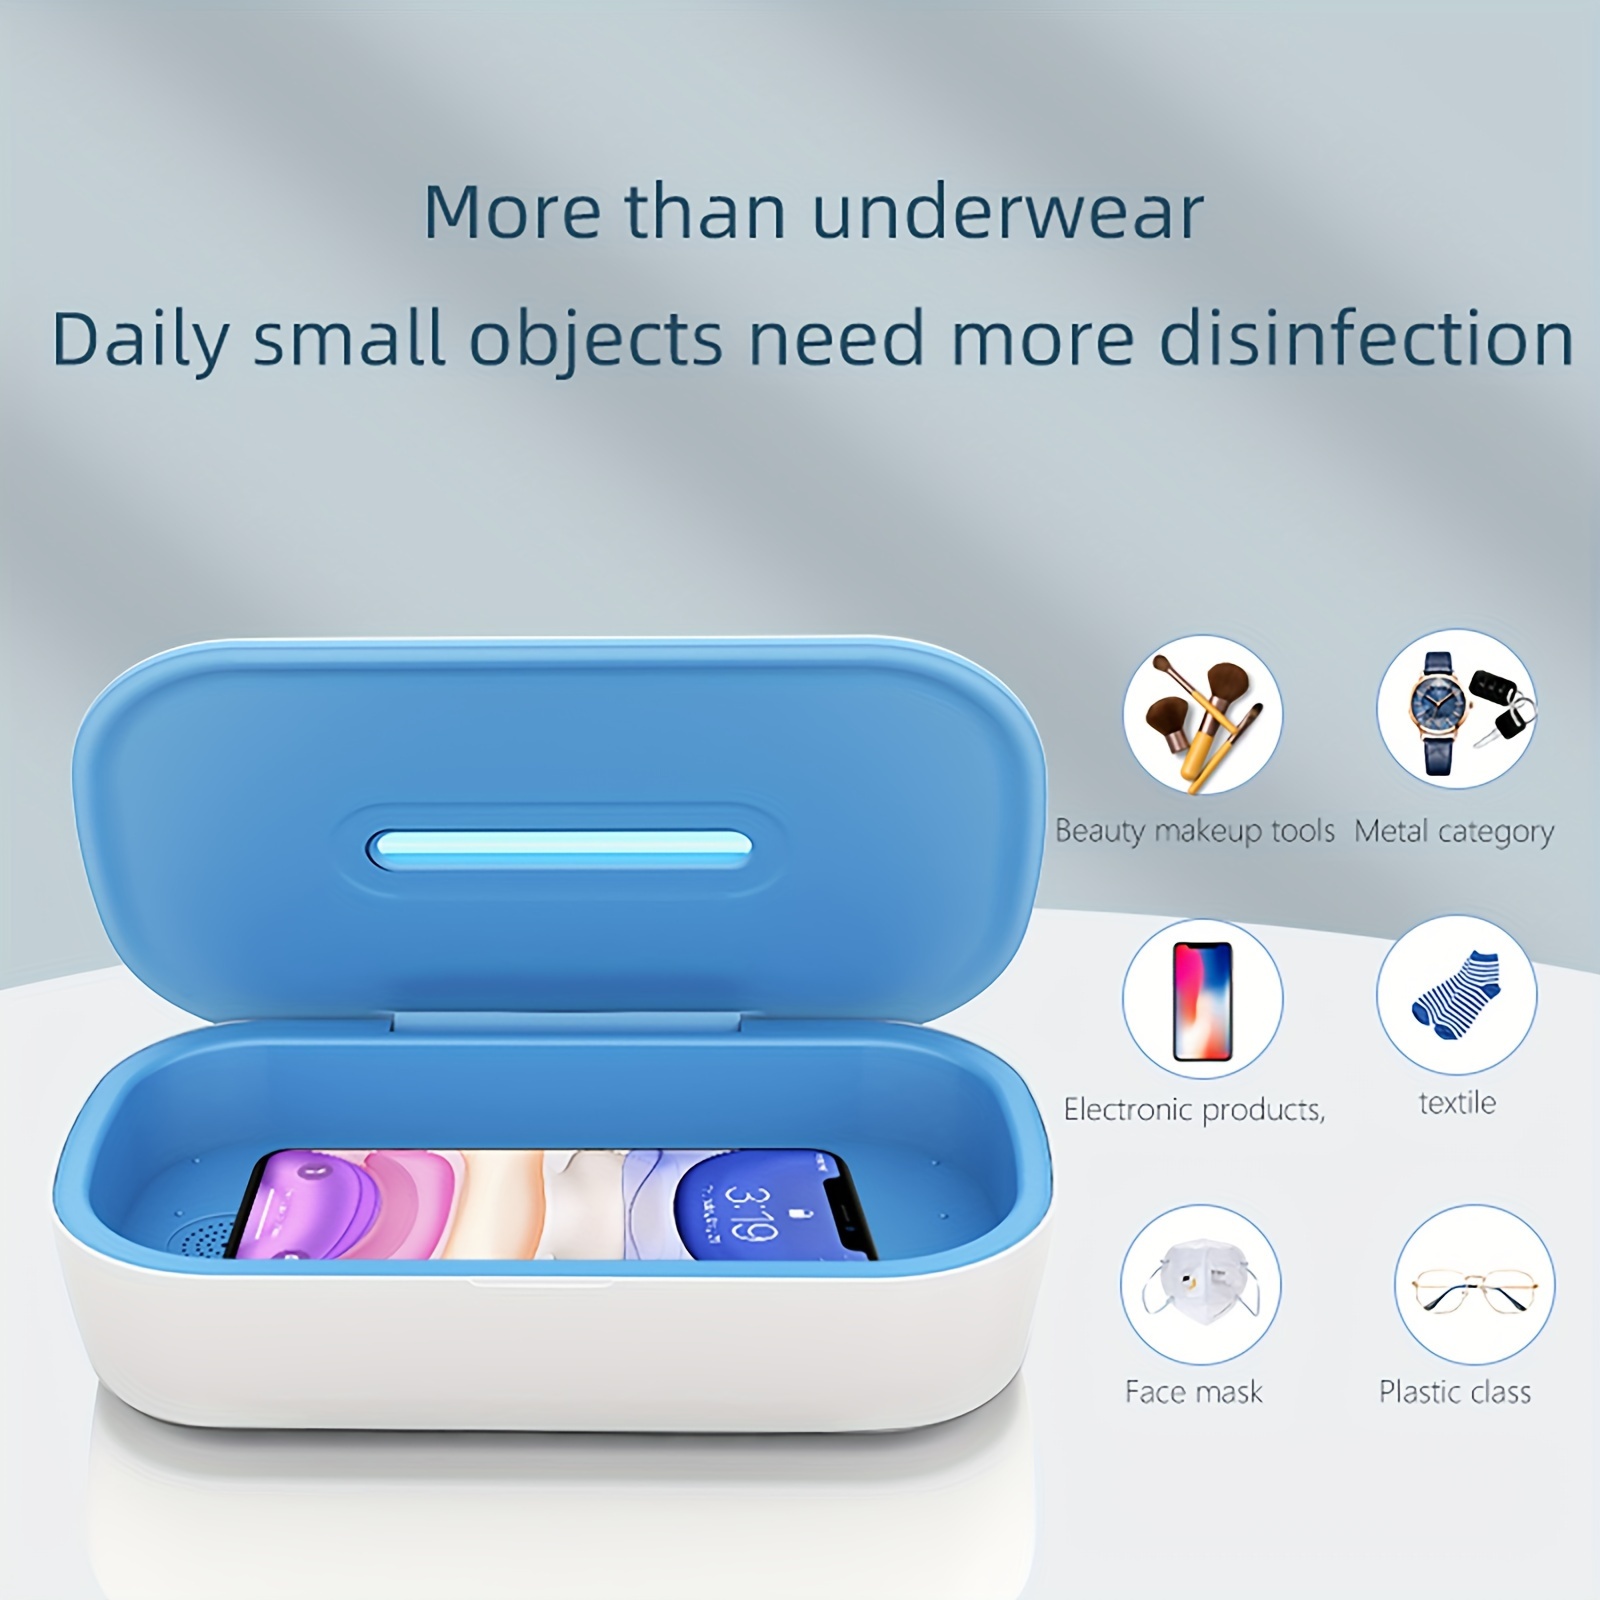 

Uv Disinfection Box, Phone Sterilization Sterilizer, 3 Minutes Of Efficient Disinfection, Increase The Fragrance, Suitable For Mobile Phones, Masks, Jewellery, Metal Products, Textiles